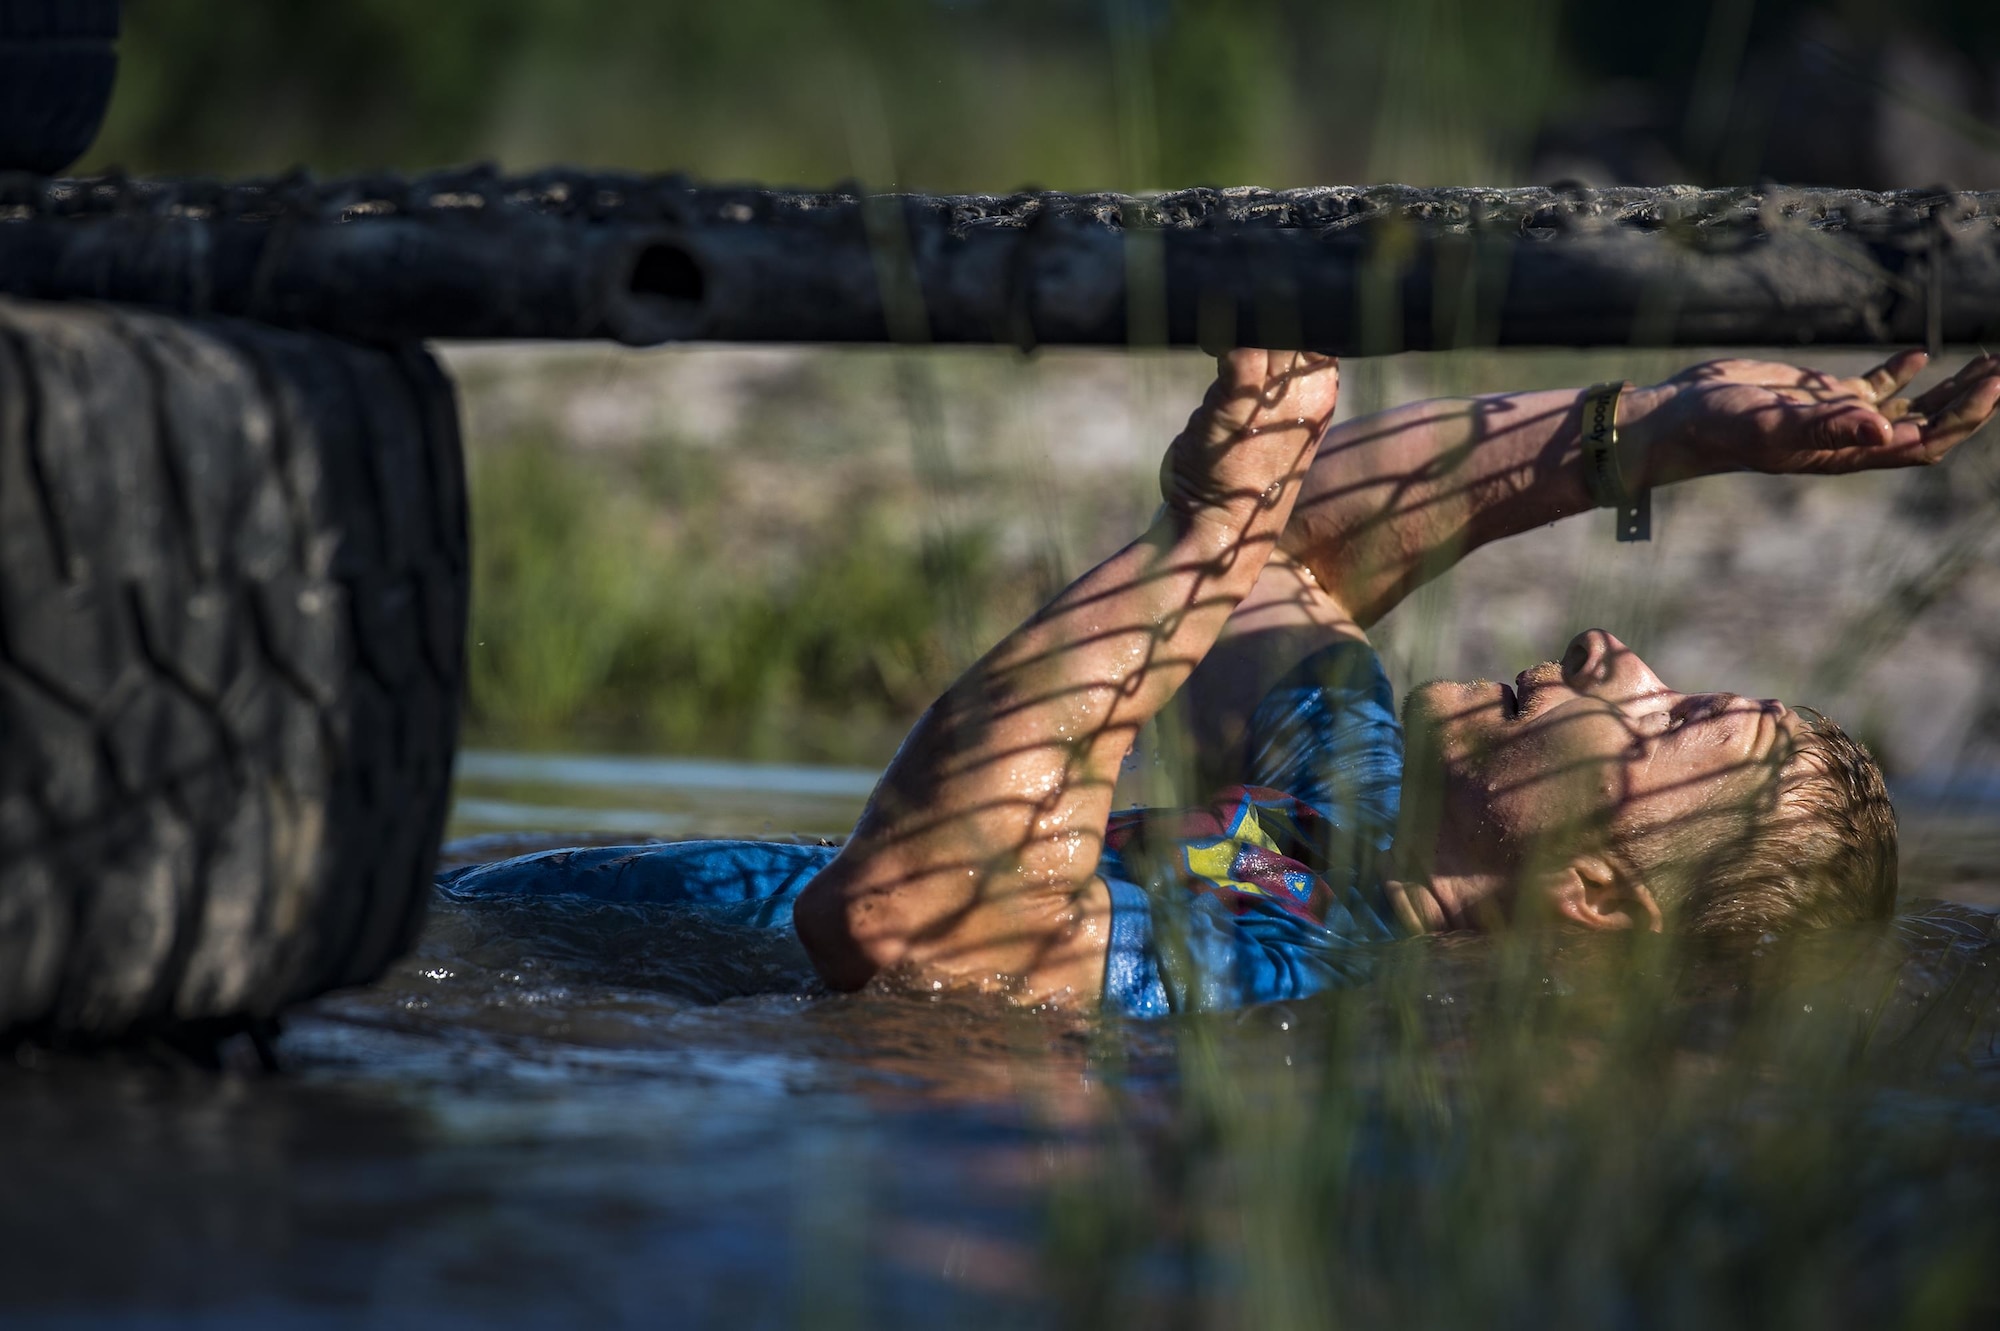 A runner pulls himself under a section of chain-link fence during the 2016 Moody Mudder, May 7, 2016, in Ray City, Ga. The Mudder challenged nearly 500 competitors to complete 20 obstacles on a 3.12-mile course for the third year in a row.  (U.S. Air Force photo by Senior Airman Ryan Callaghan/Released)